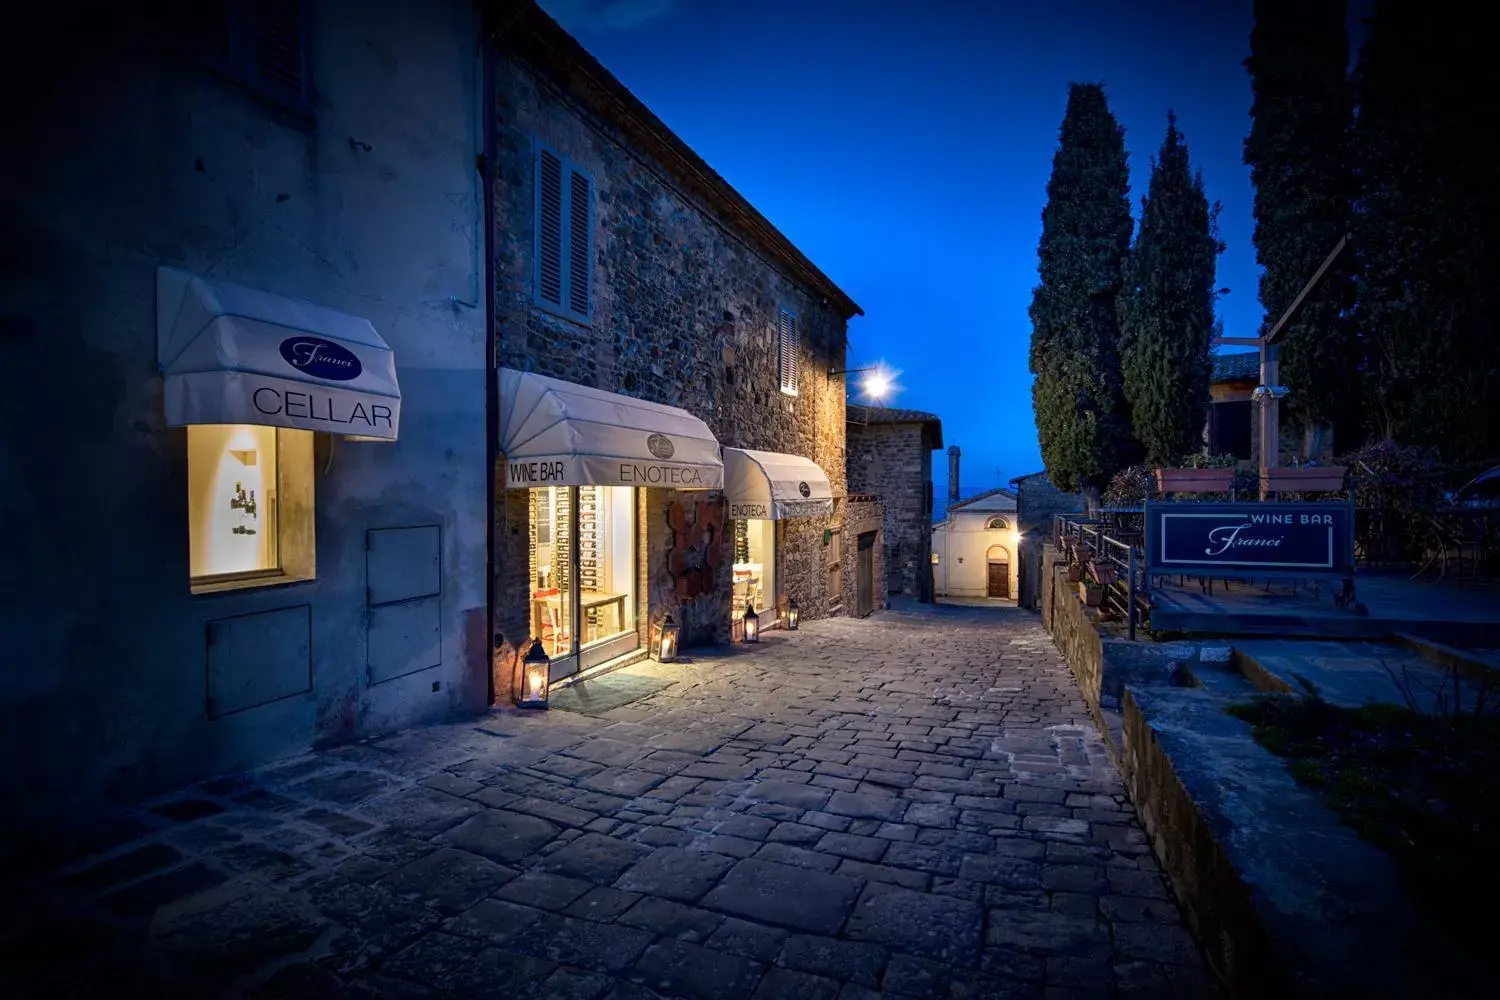 Restaurant/places to eat, Property Building in Drogheria e Locanda Franci